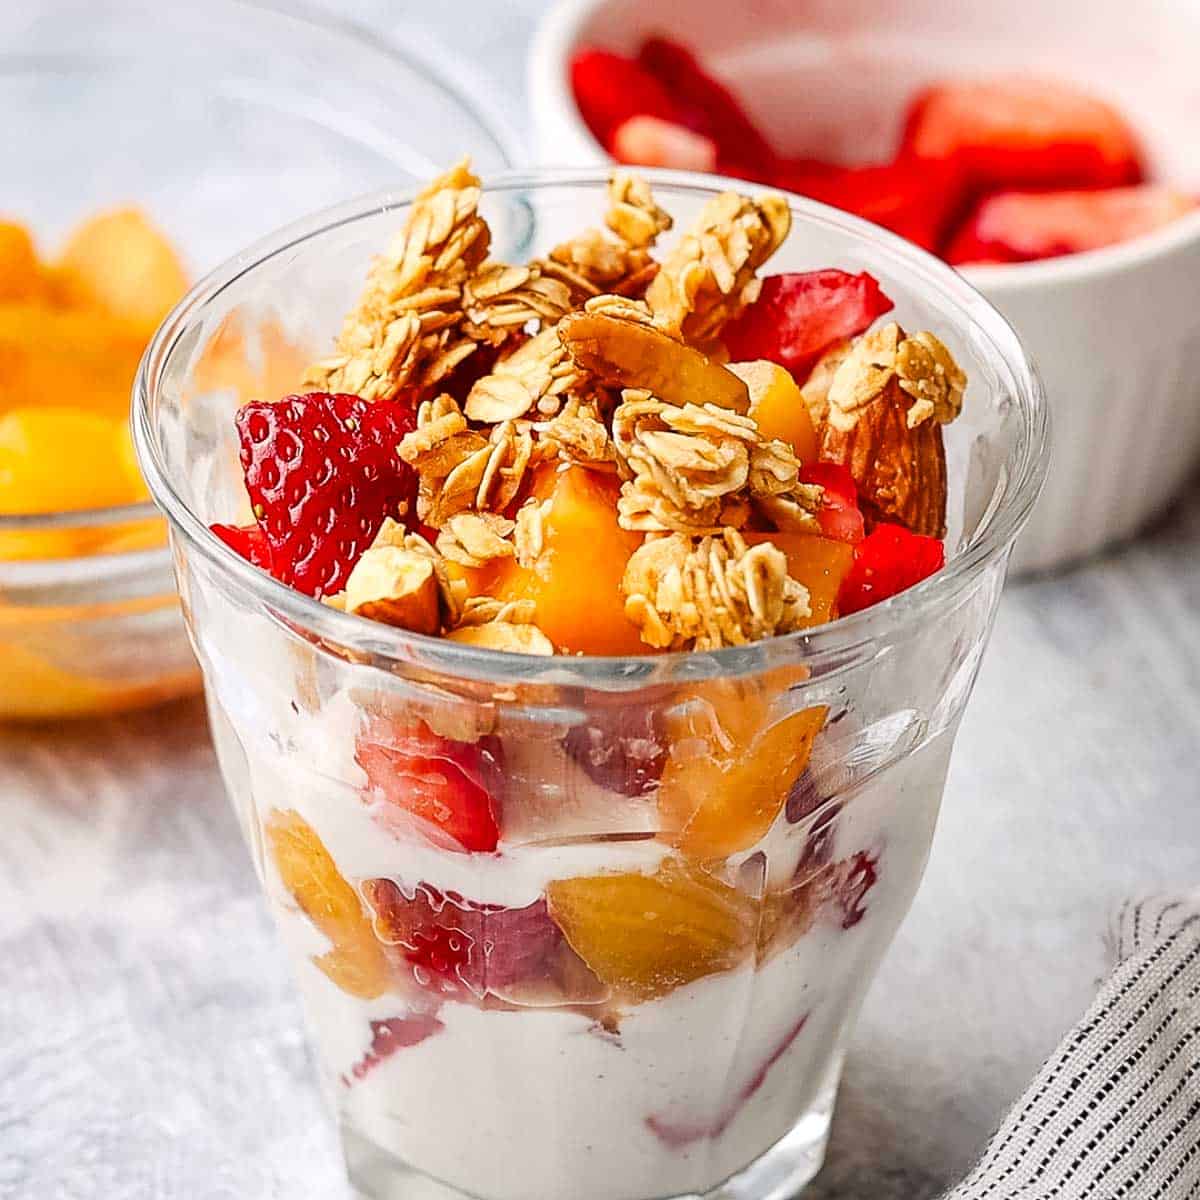 granola added on top if the fruit and yogurt layers